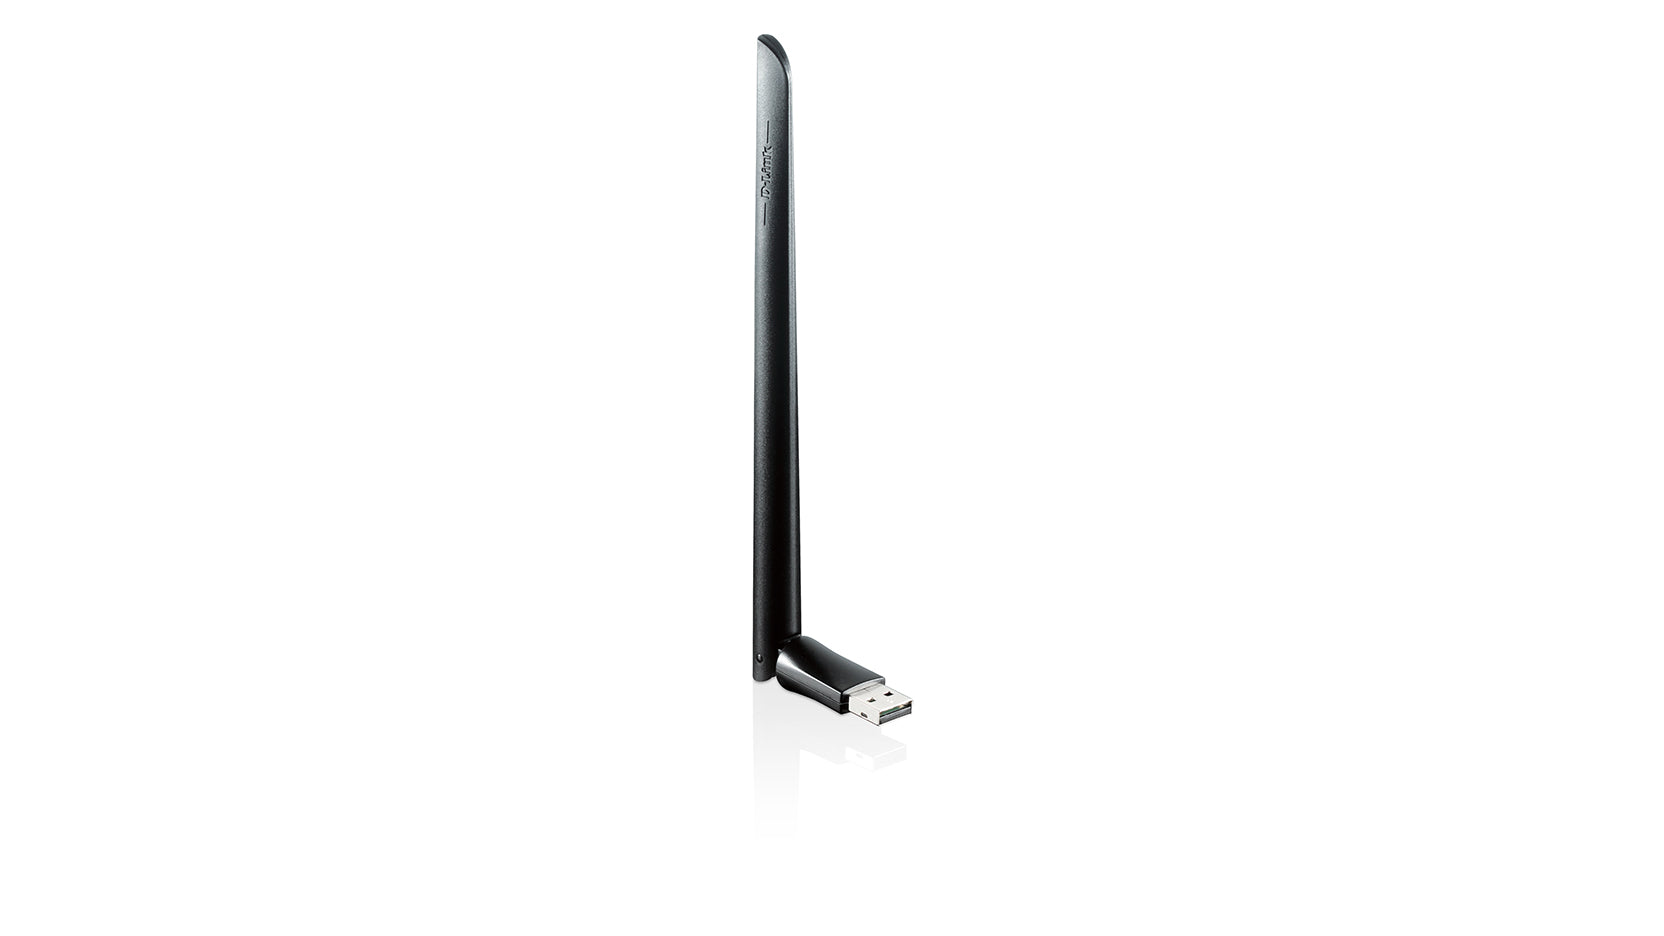 Wireless AC 600 USB 2.0 High Gain Nano Adapter with extrenal Antenna (DWA-172/SG)